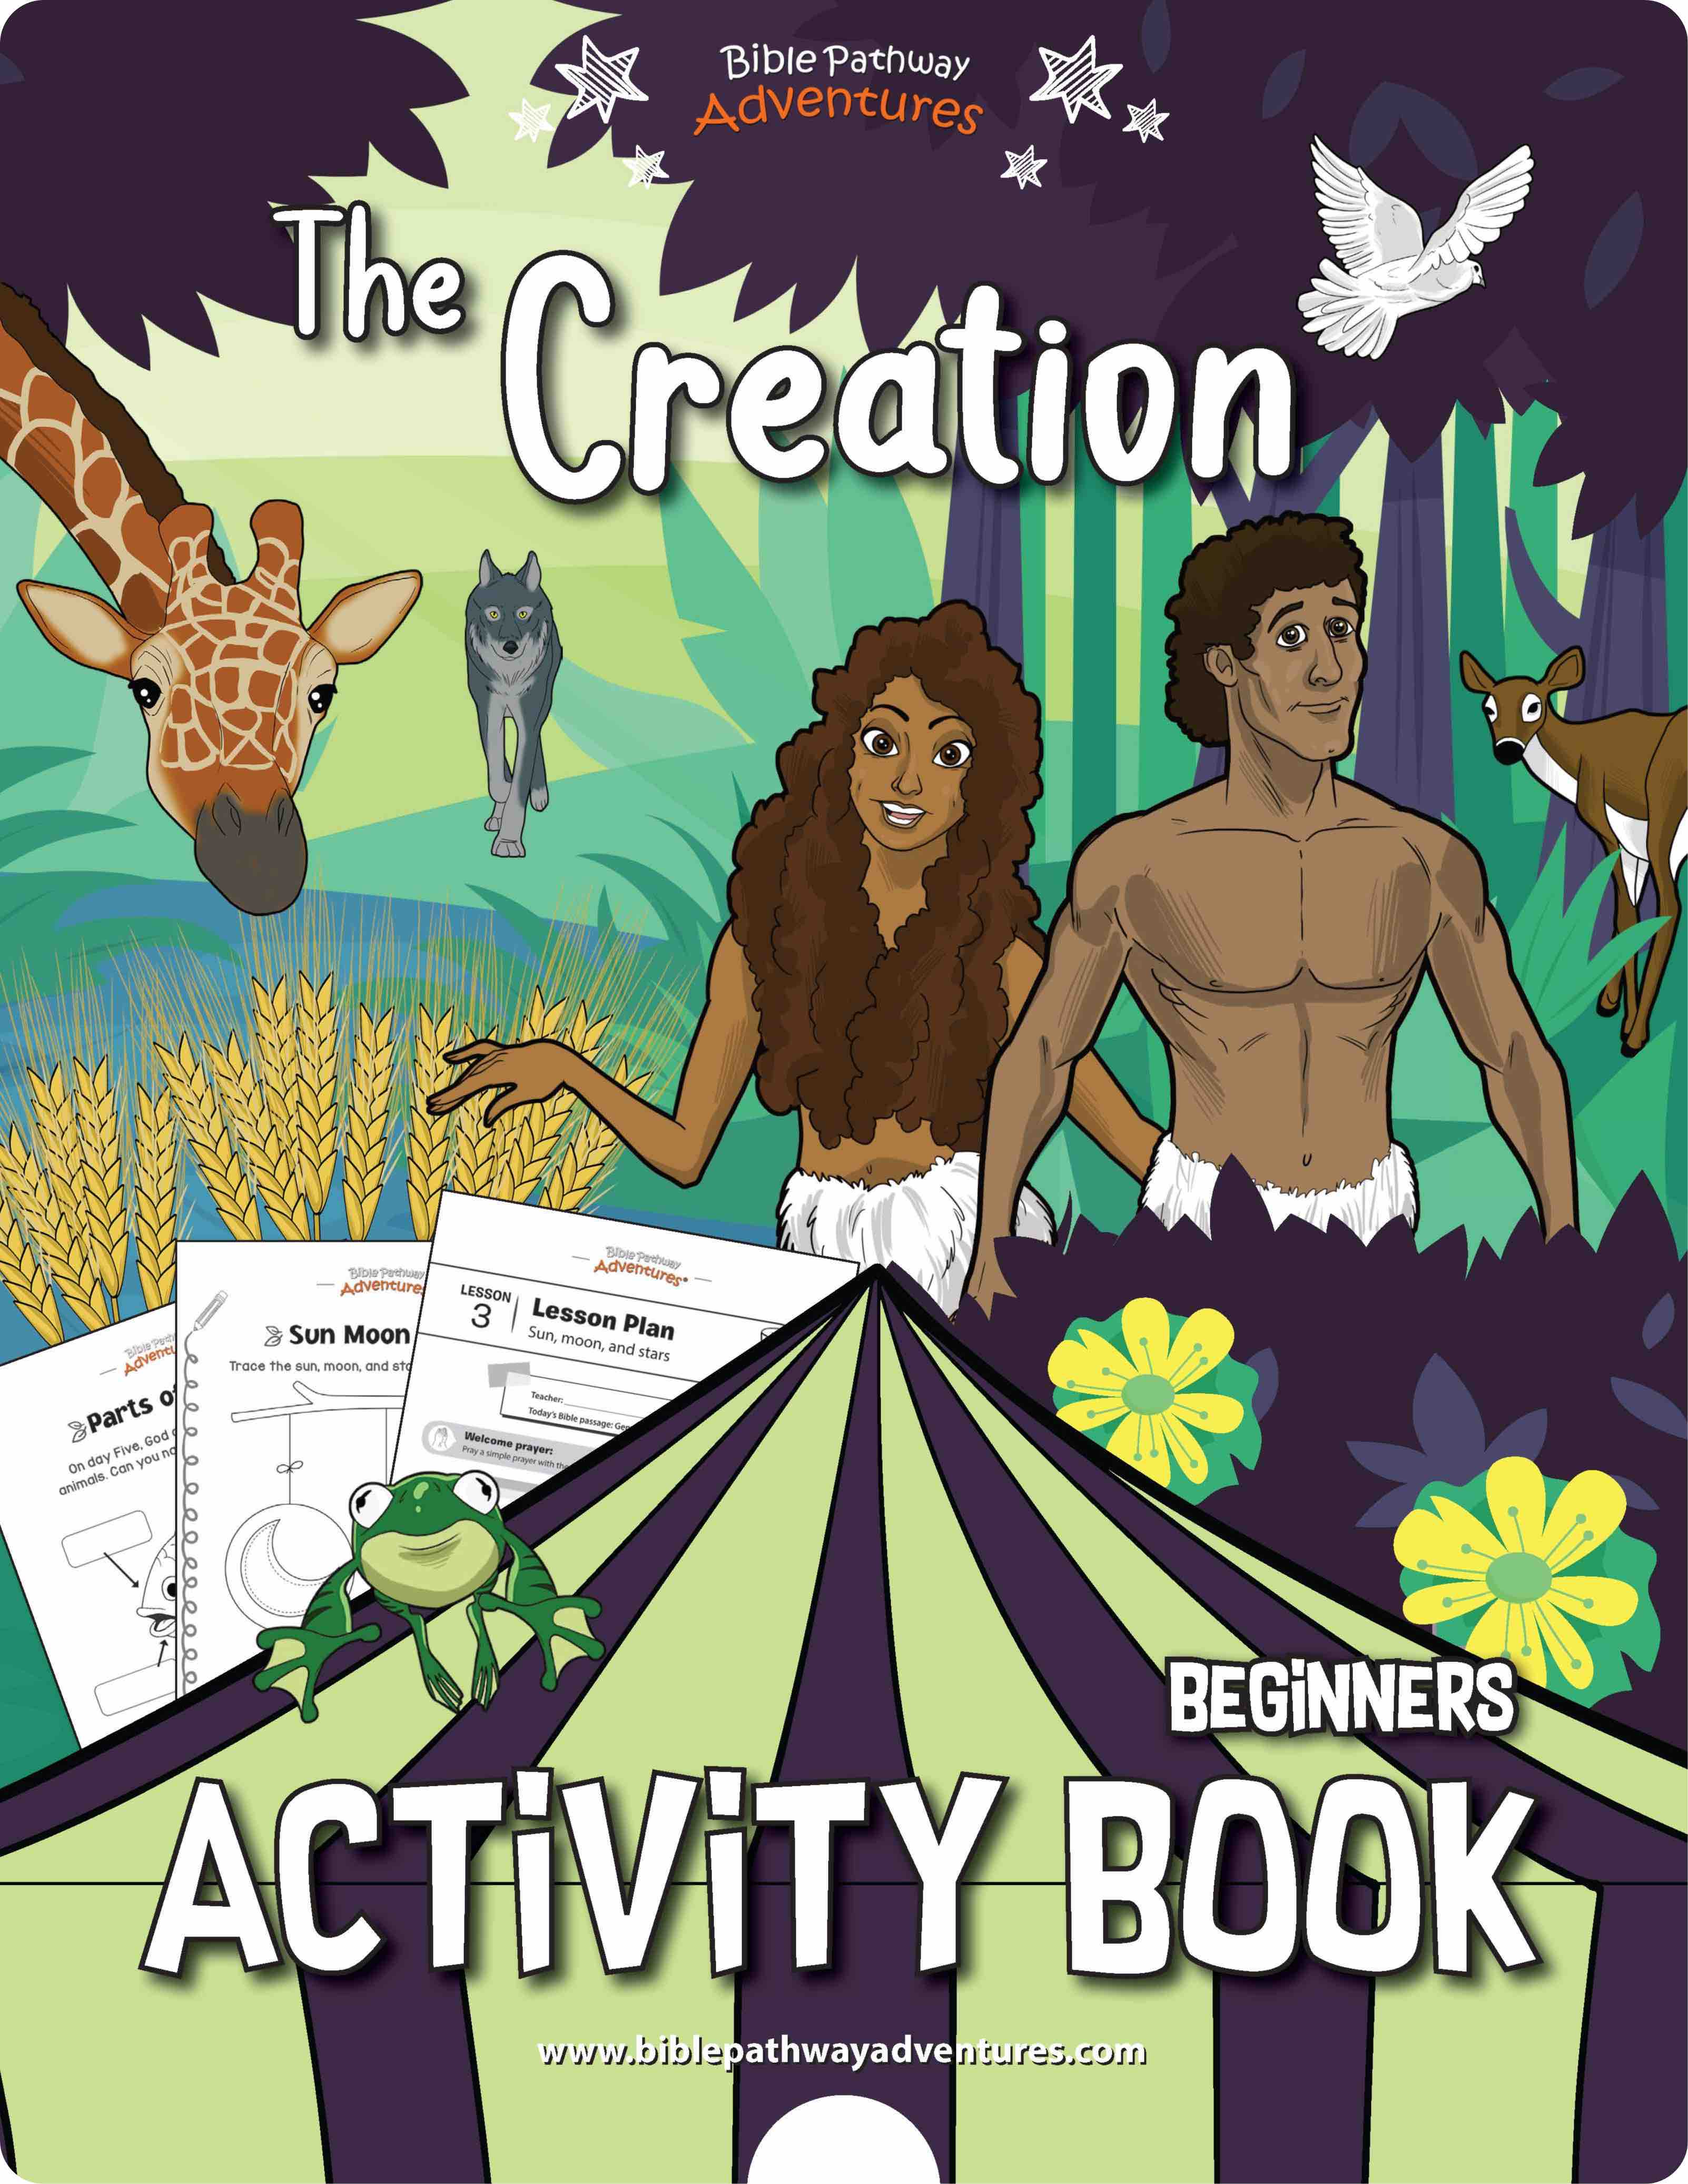 for　Book　Pathway　The　Creation　Adventures　–　Activity　Beginners　Bible